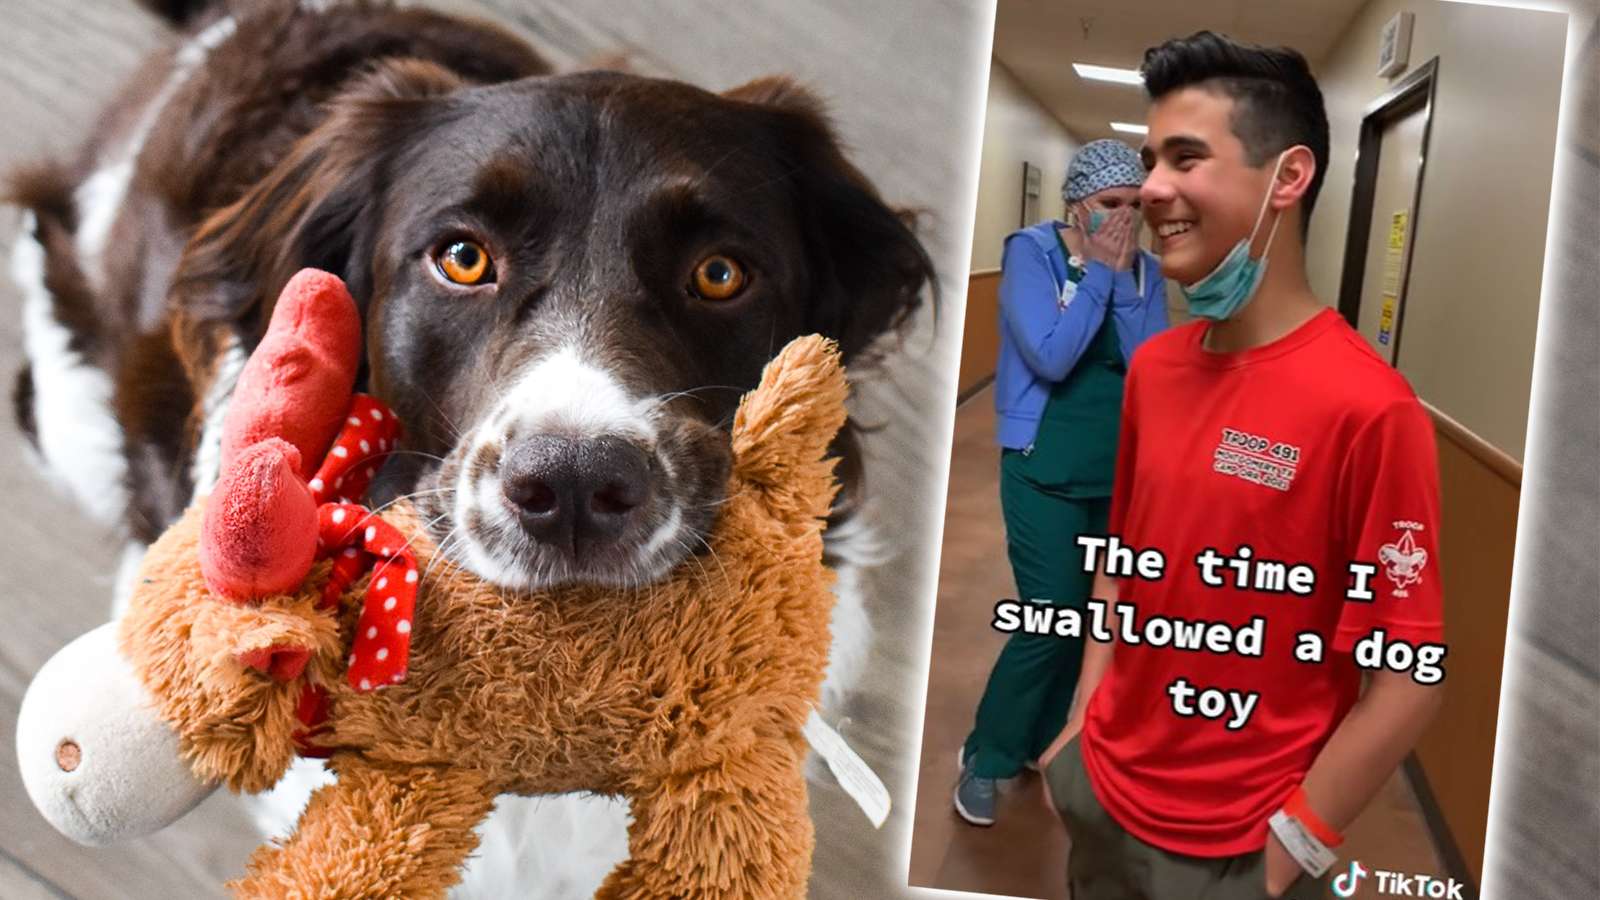 TikToker goes viral after swallowing dog squeaky toy